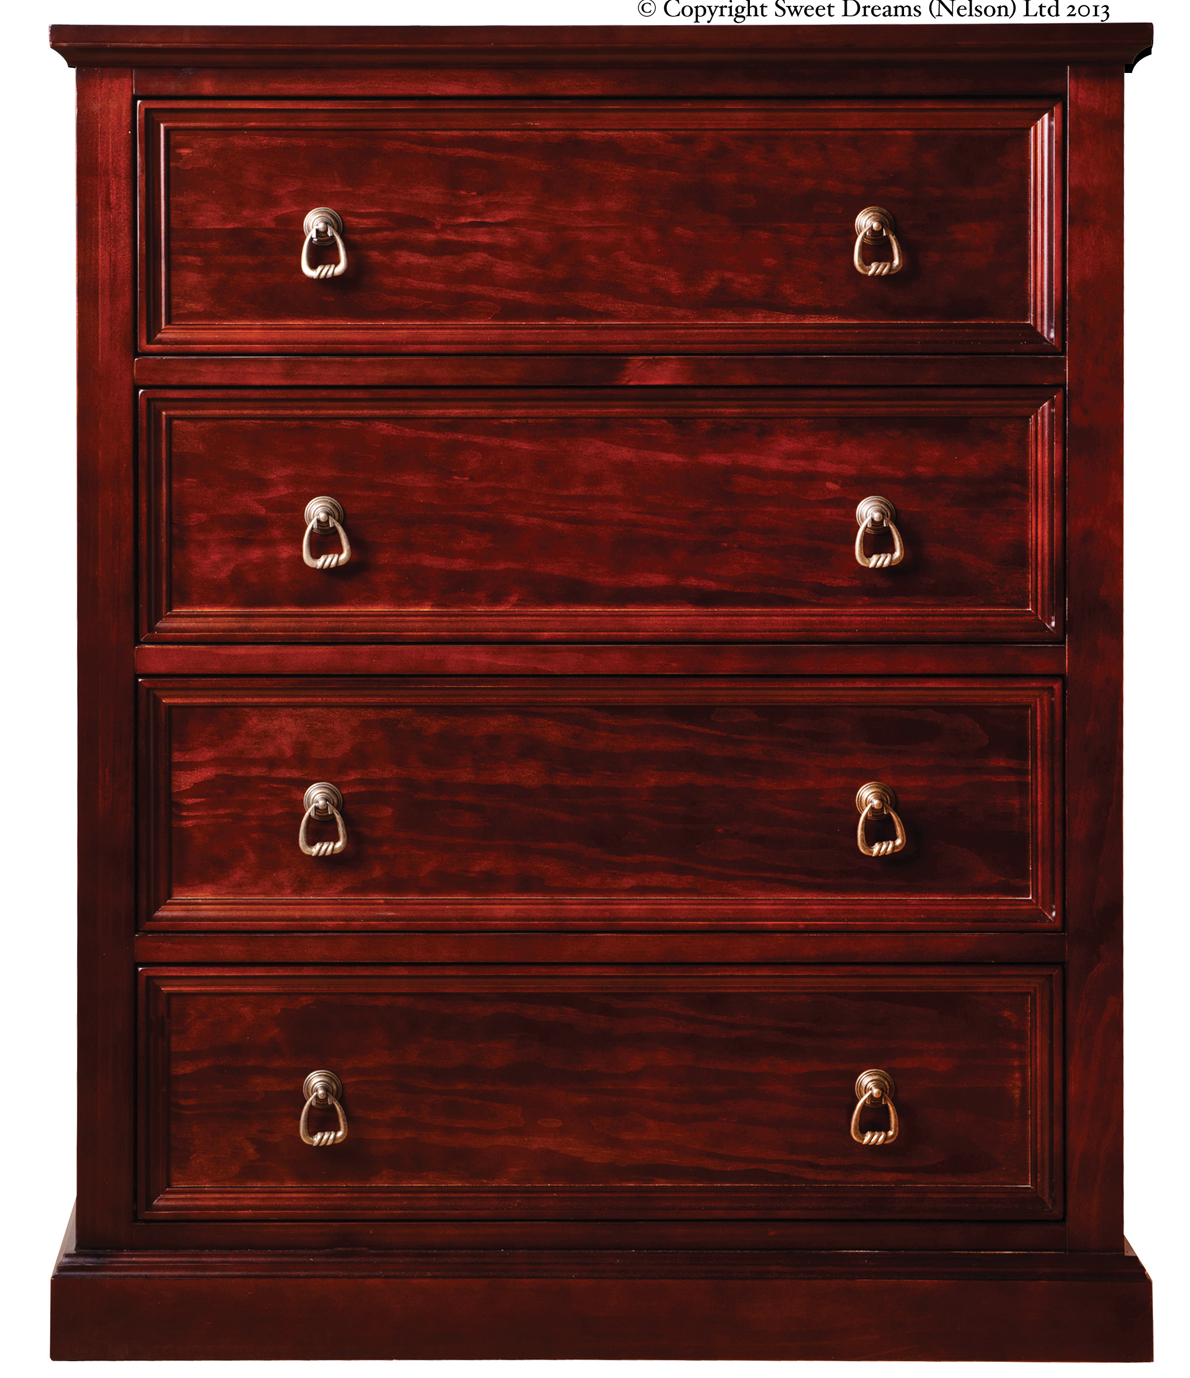 Sweet Dreams Wagner 4 Drawer Chest Mahogany